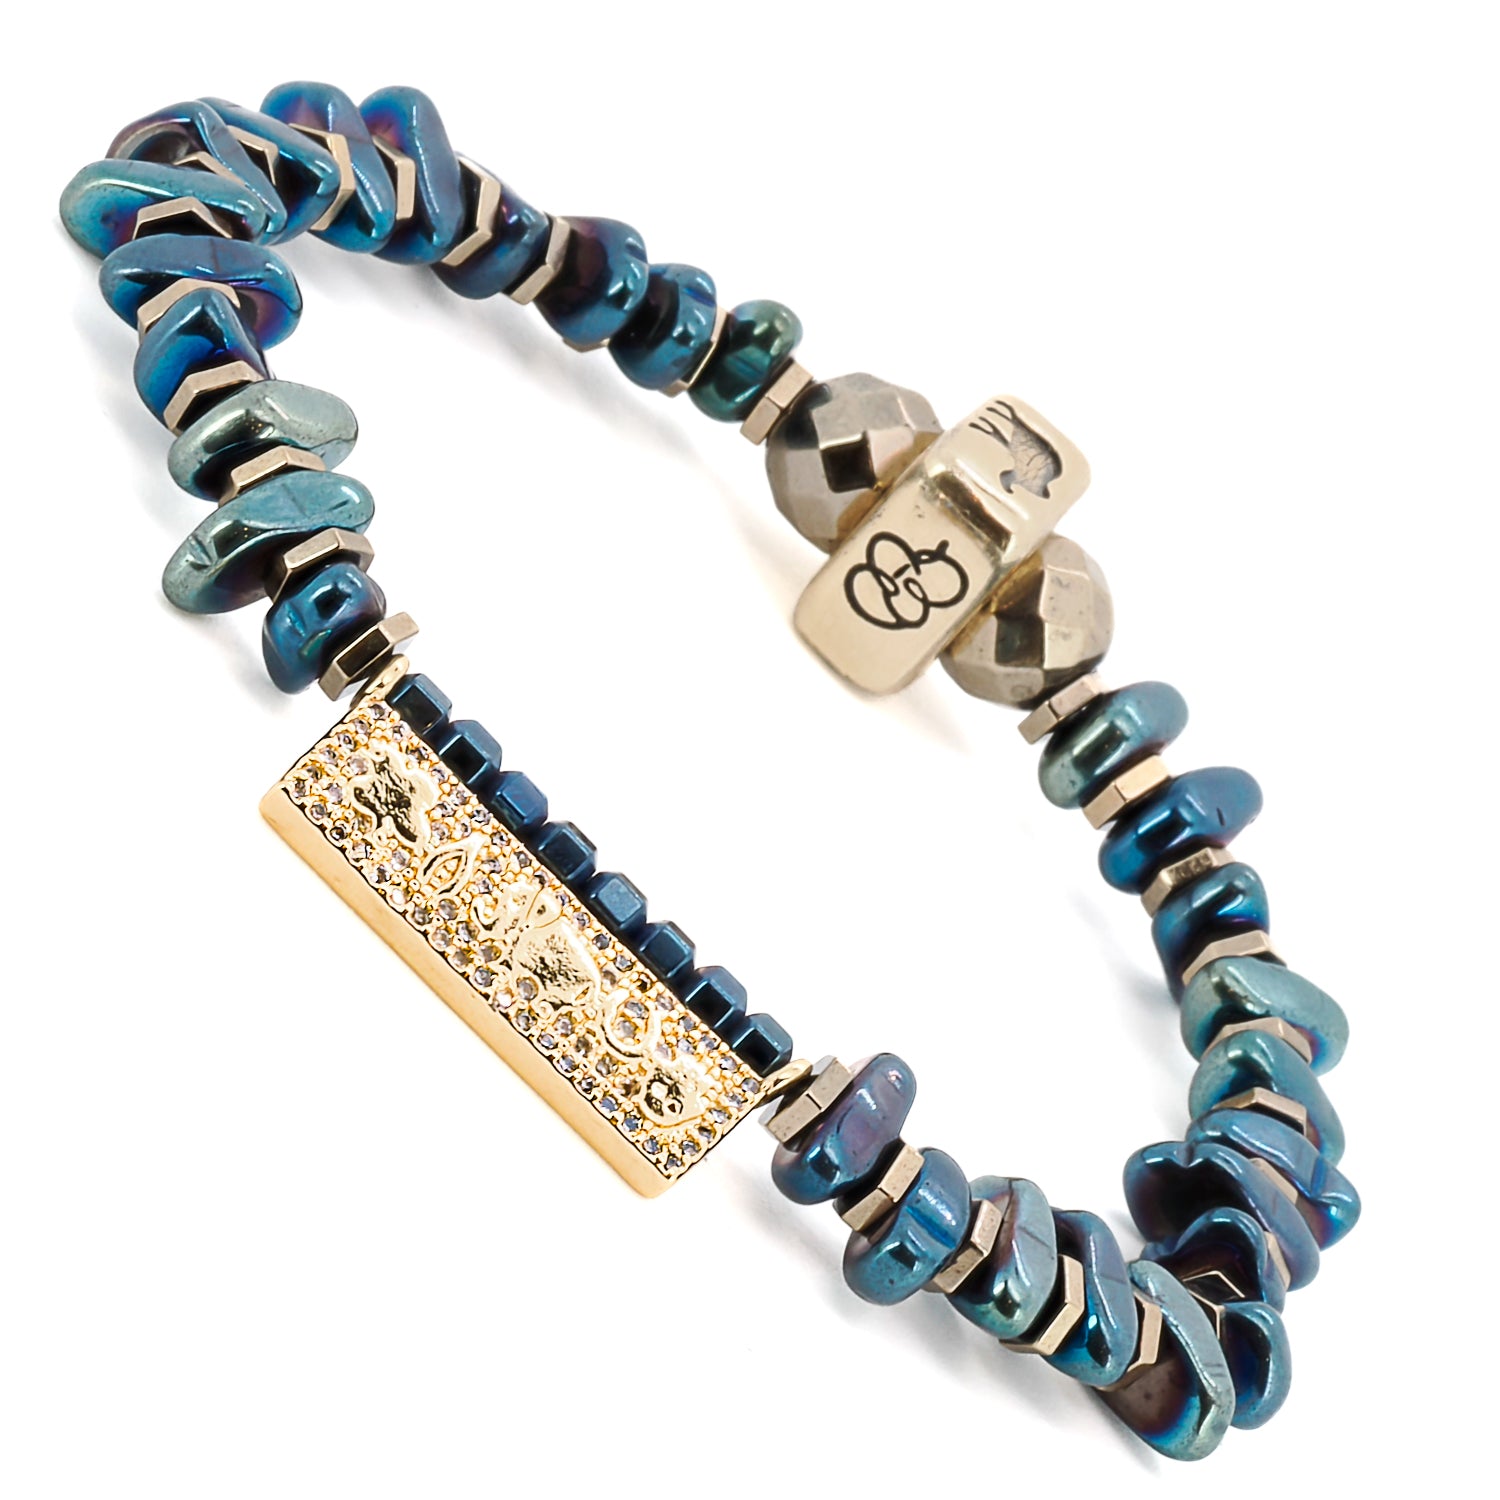 Add a touch of meaningful symbolism to your style with the Protection & Luck Blue Hematite Bracelet, a powerful accessory for daily wear.